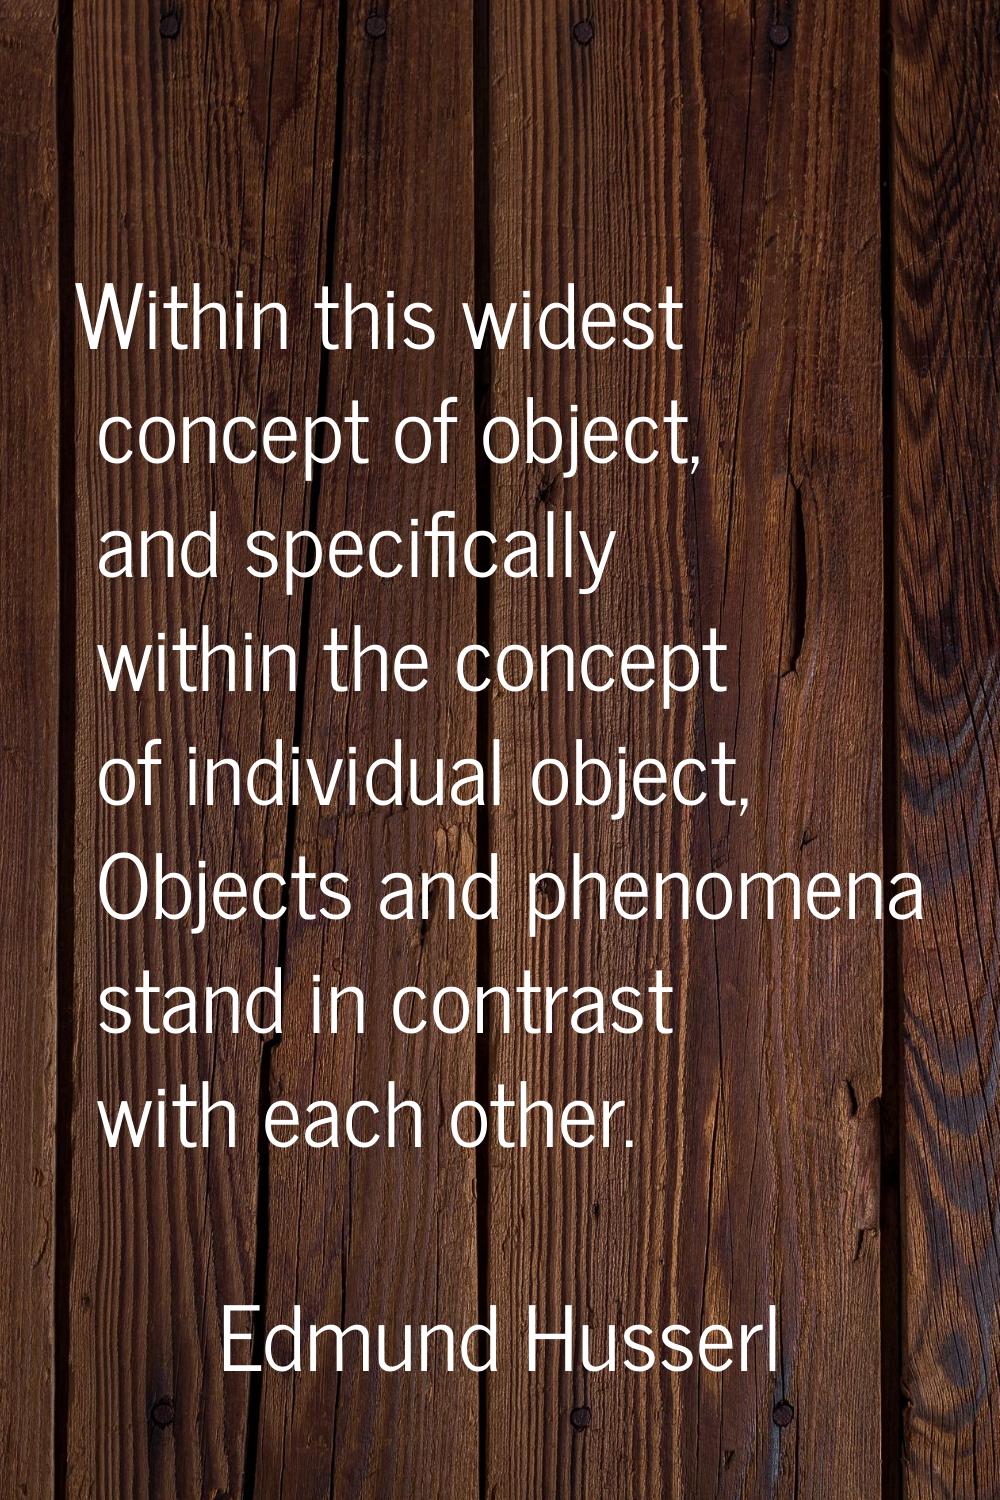 Within this widest concept of object, and specifically within the concept of individual object, Obj